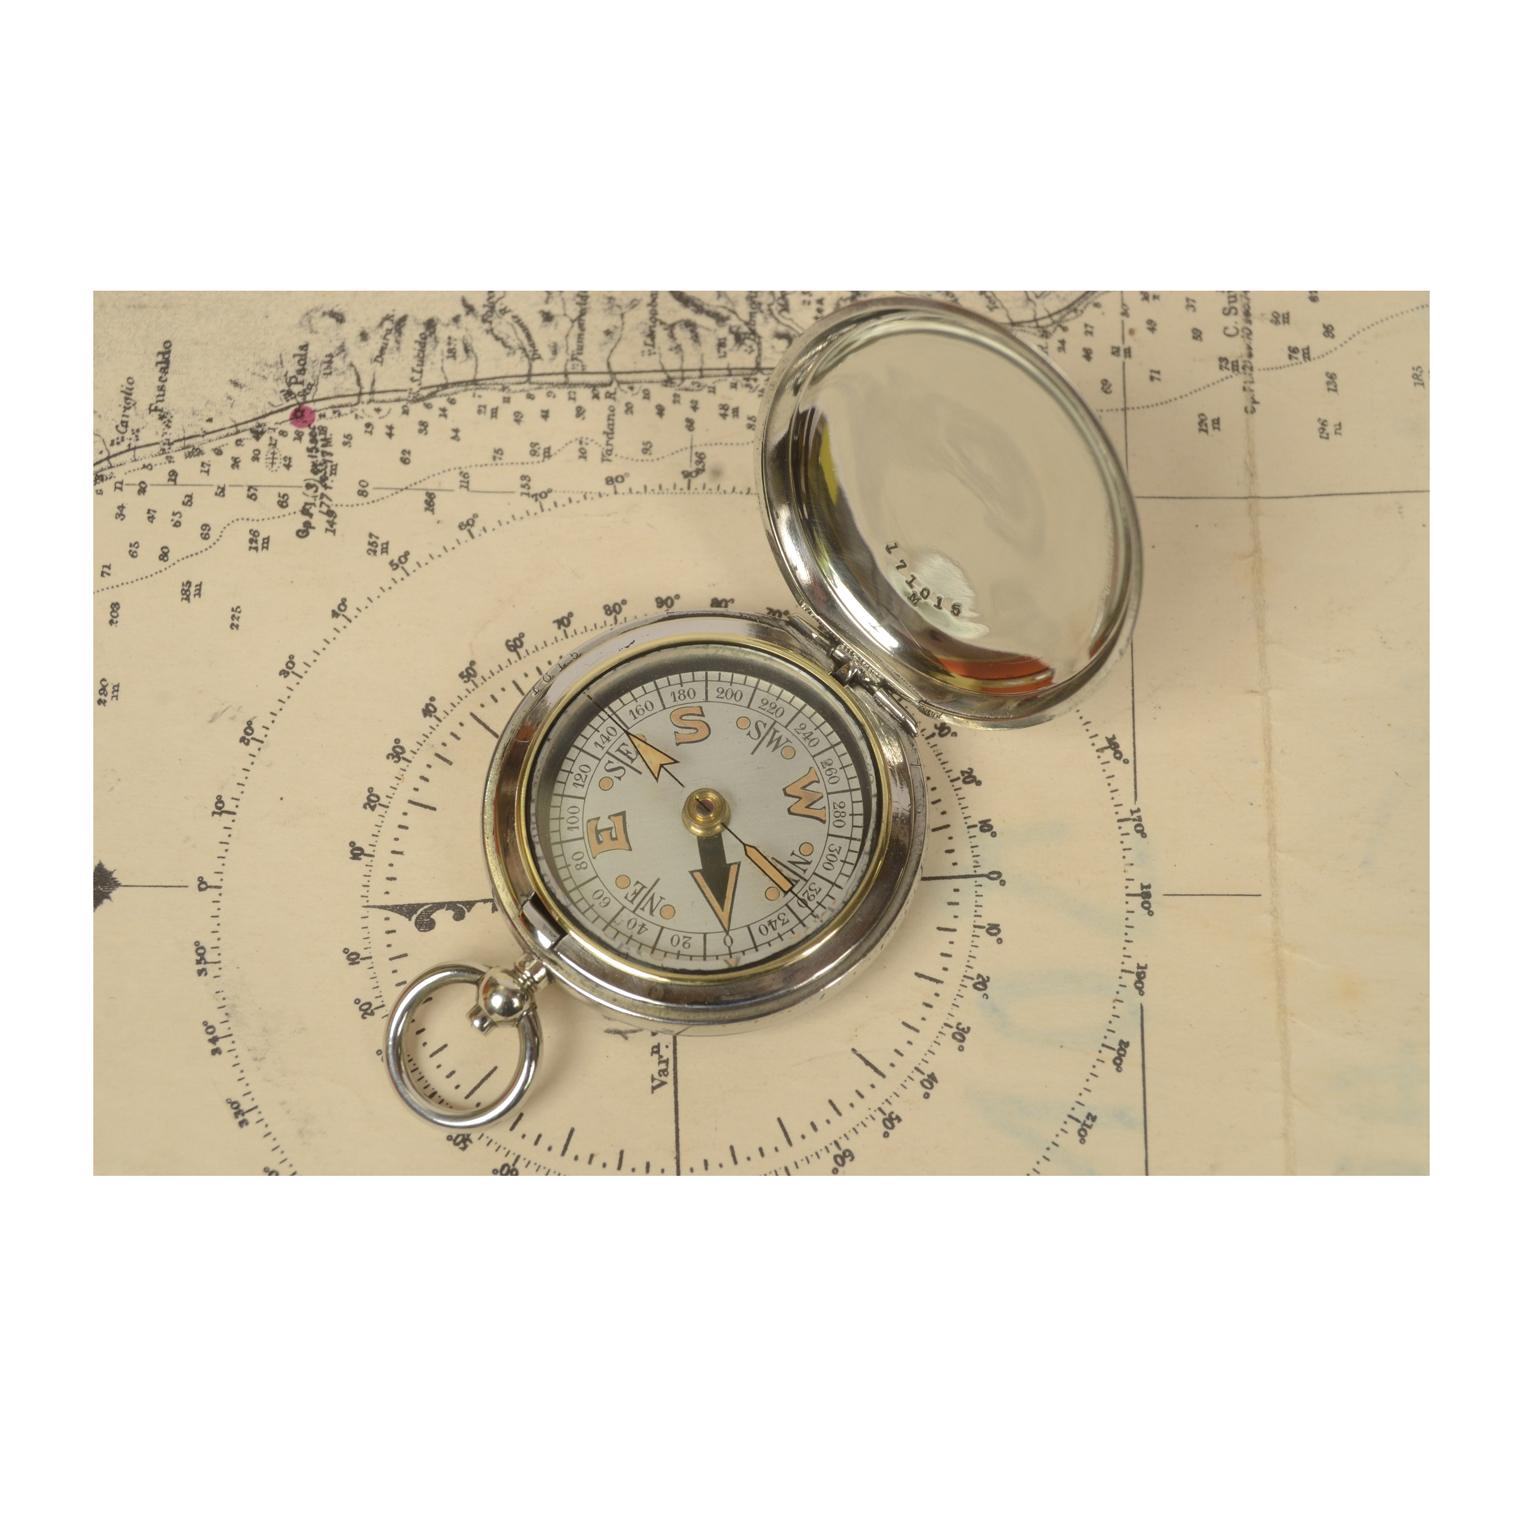 Pocket compass used by British aviation officers made of chromed brass in the shape of a pocket watch, complete with chain signed Dennison Birmingham VI 59259 of 1917. The compass has a lid with snap closure with release button inside of the ring.